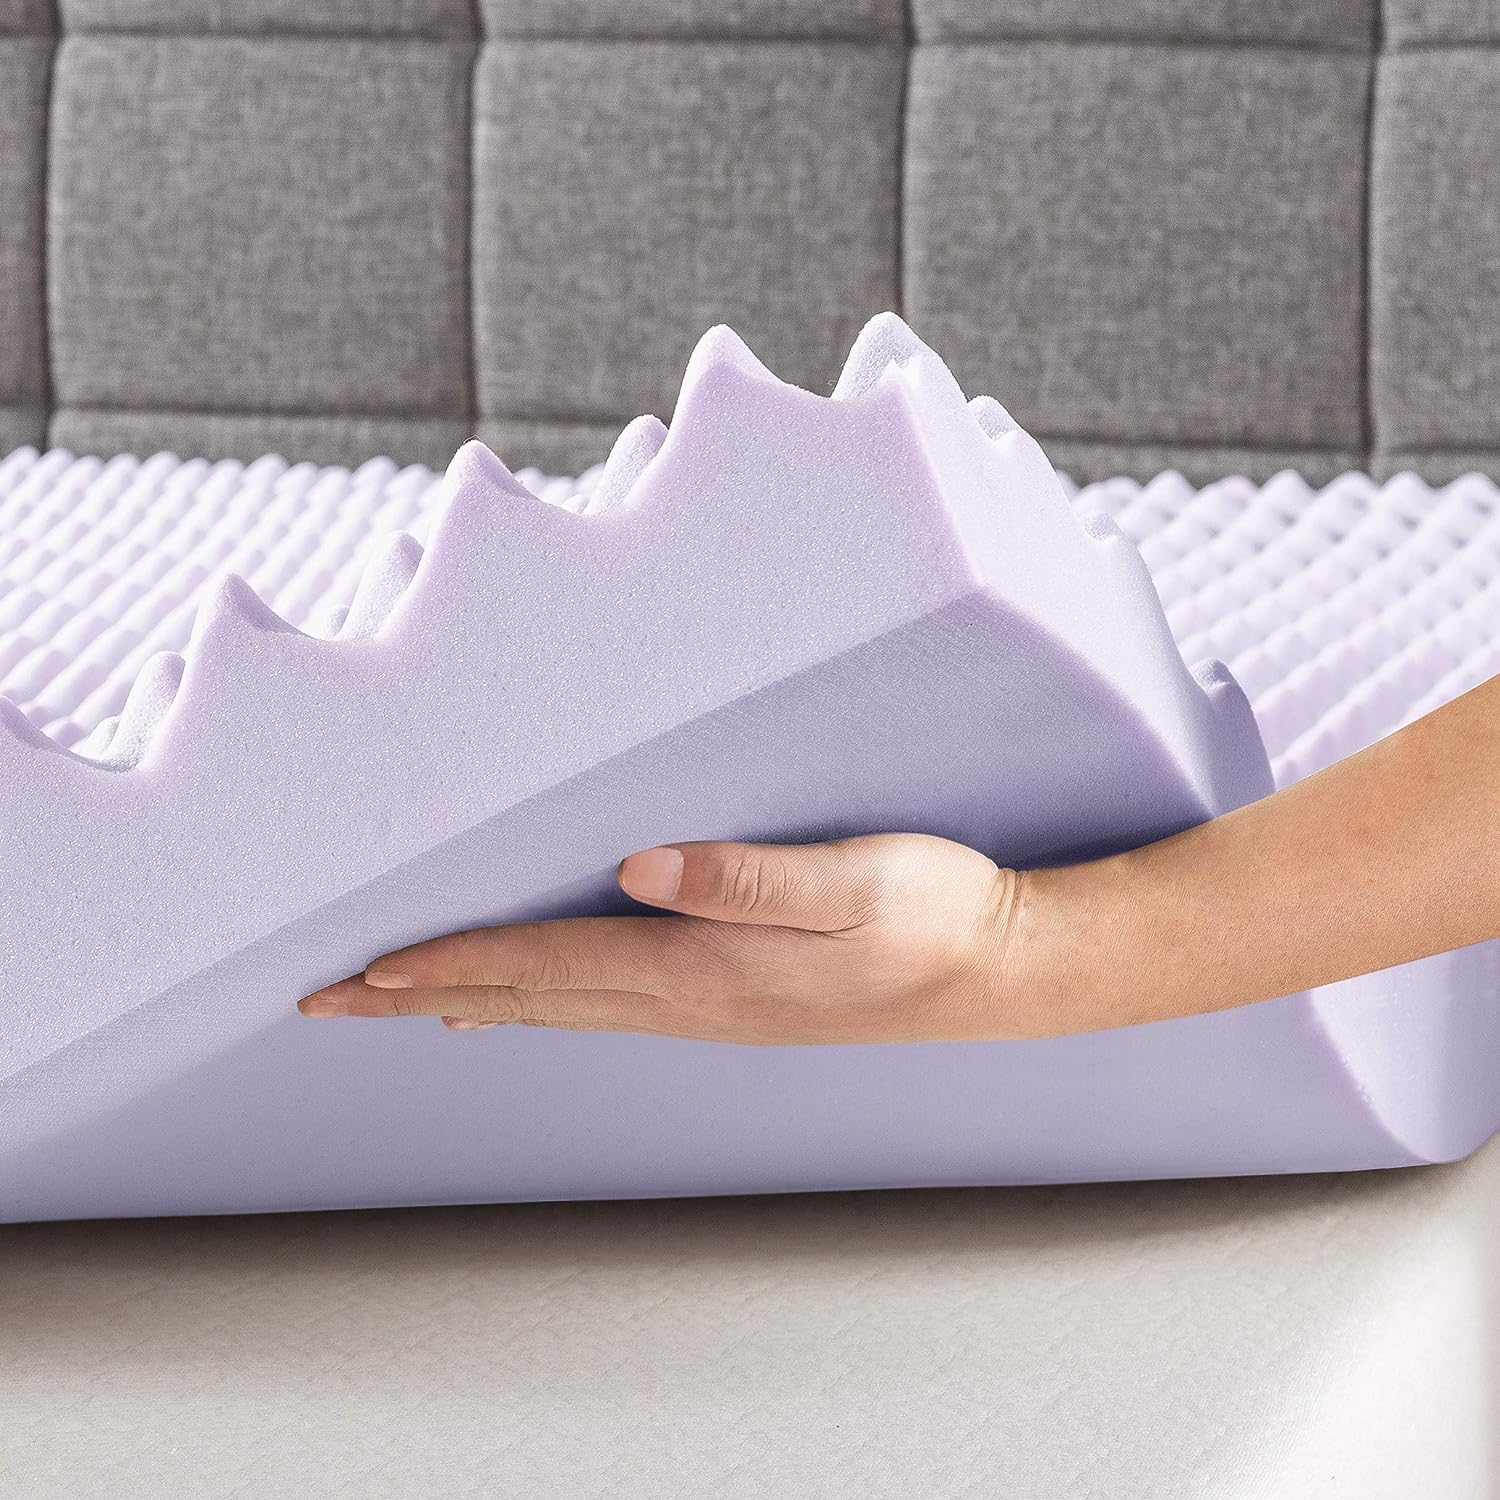 Egg Crate Memory Foam: Sleep Soundly and Wake Up Refreshed